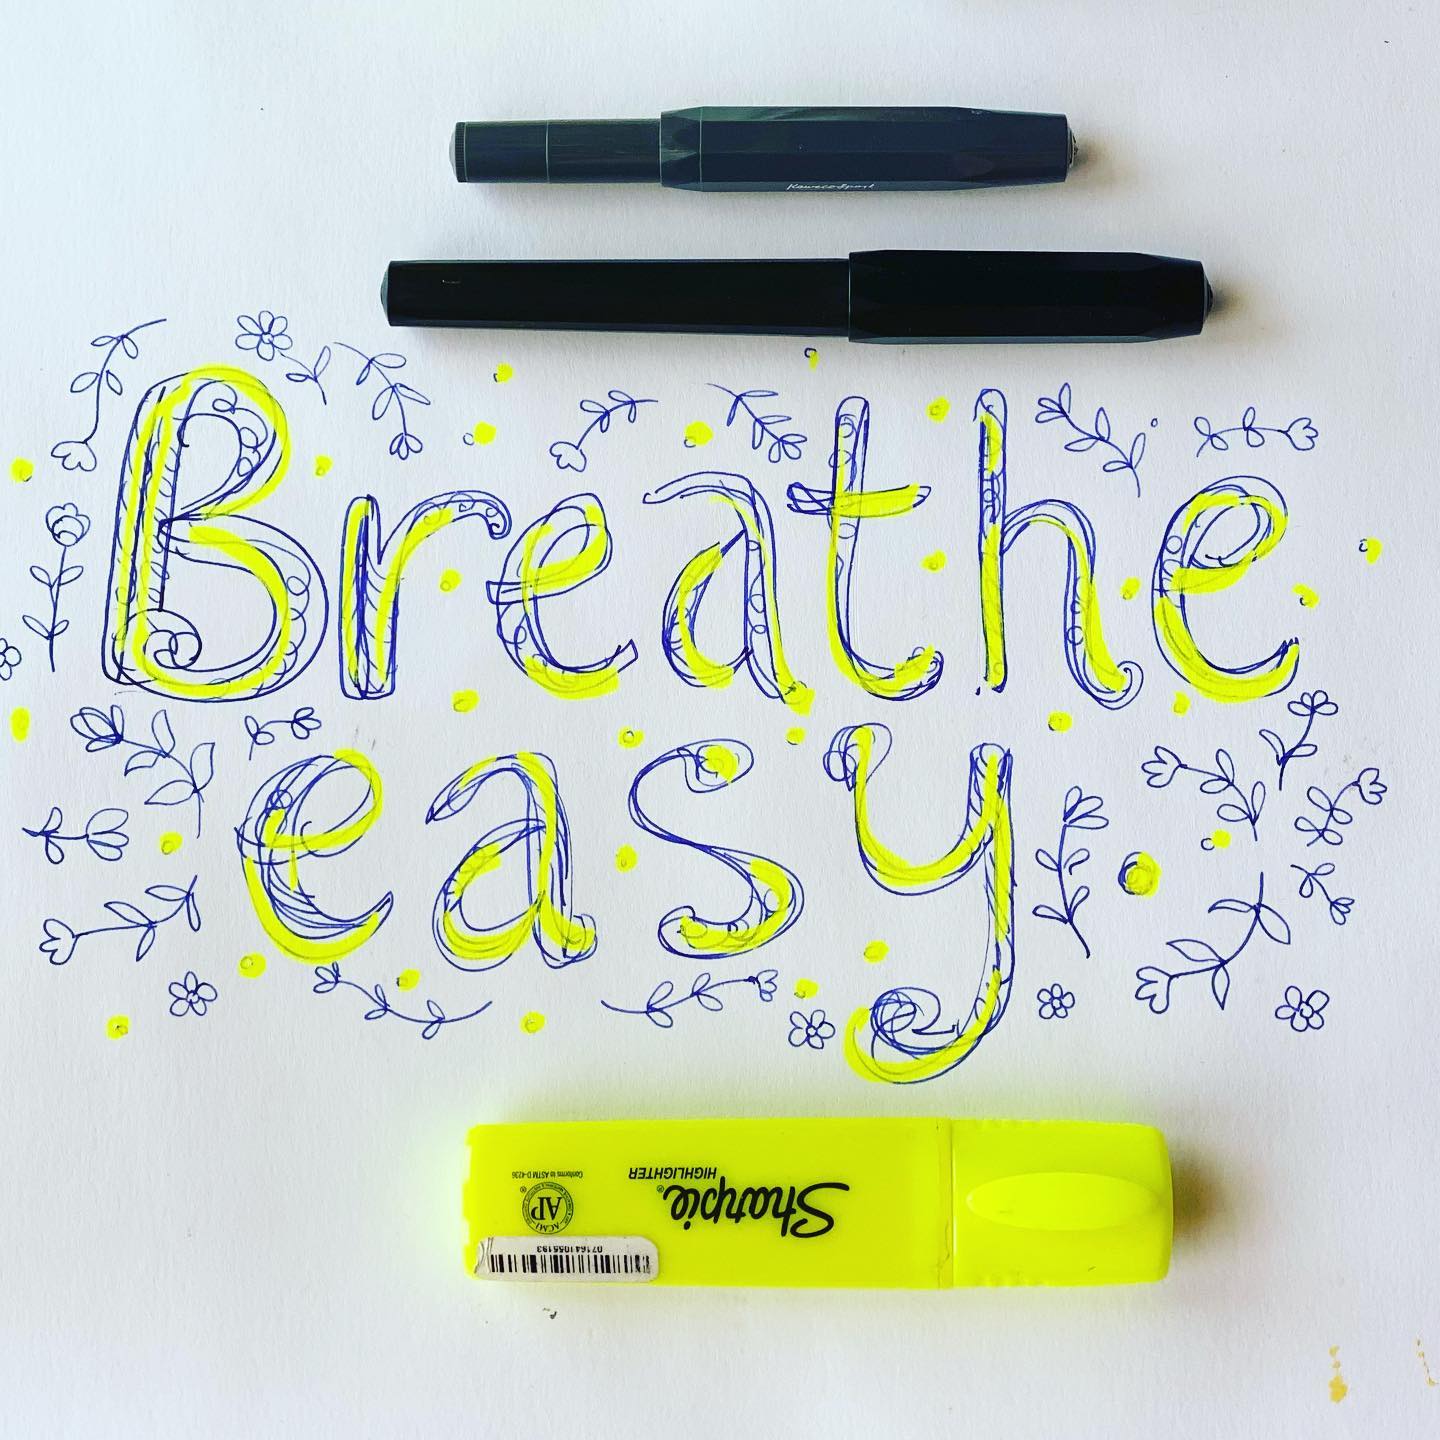 Yes, we all need to focus on our breath from time to time. Breathe easy.